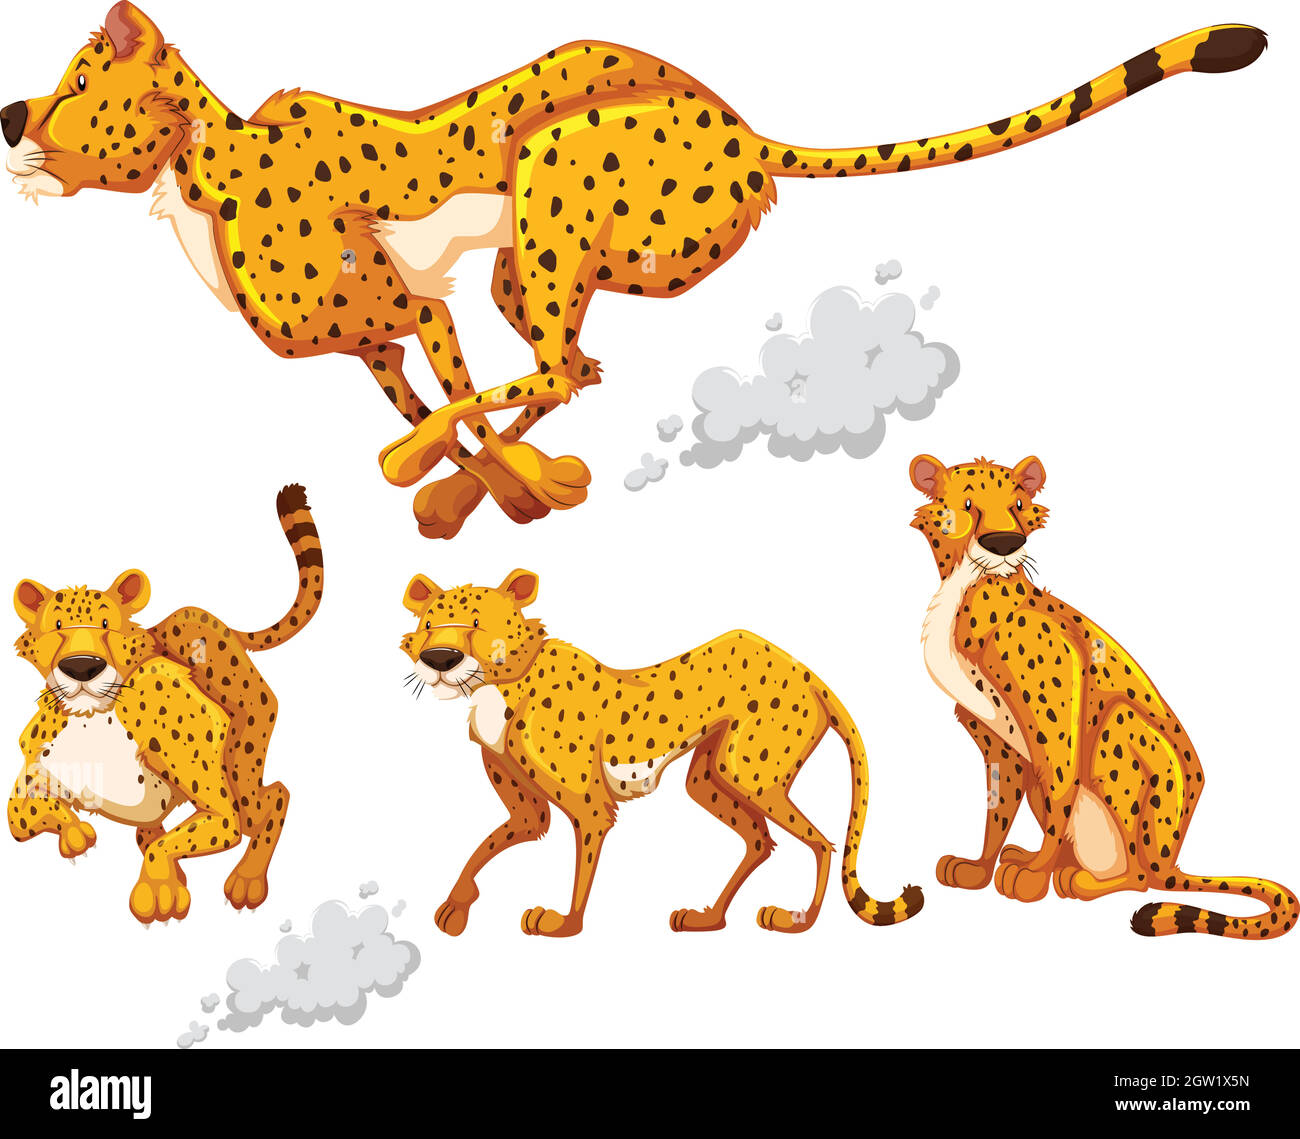 Cheetah in four different actions Stock Vector